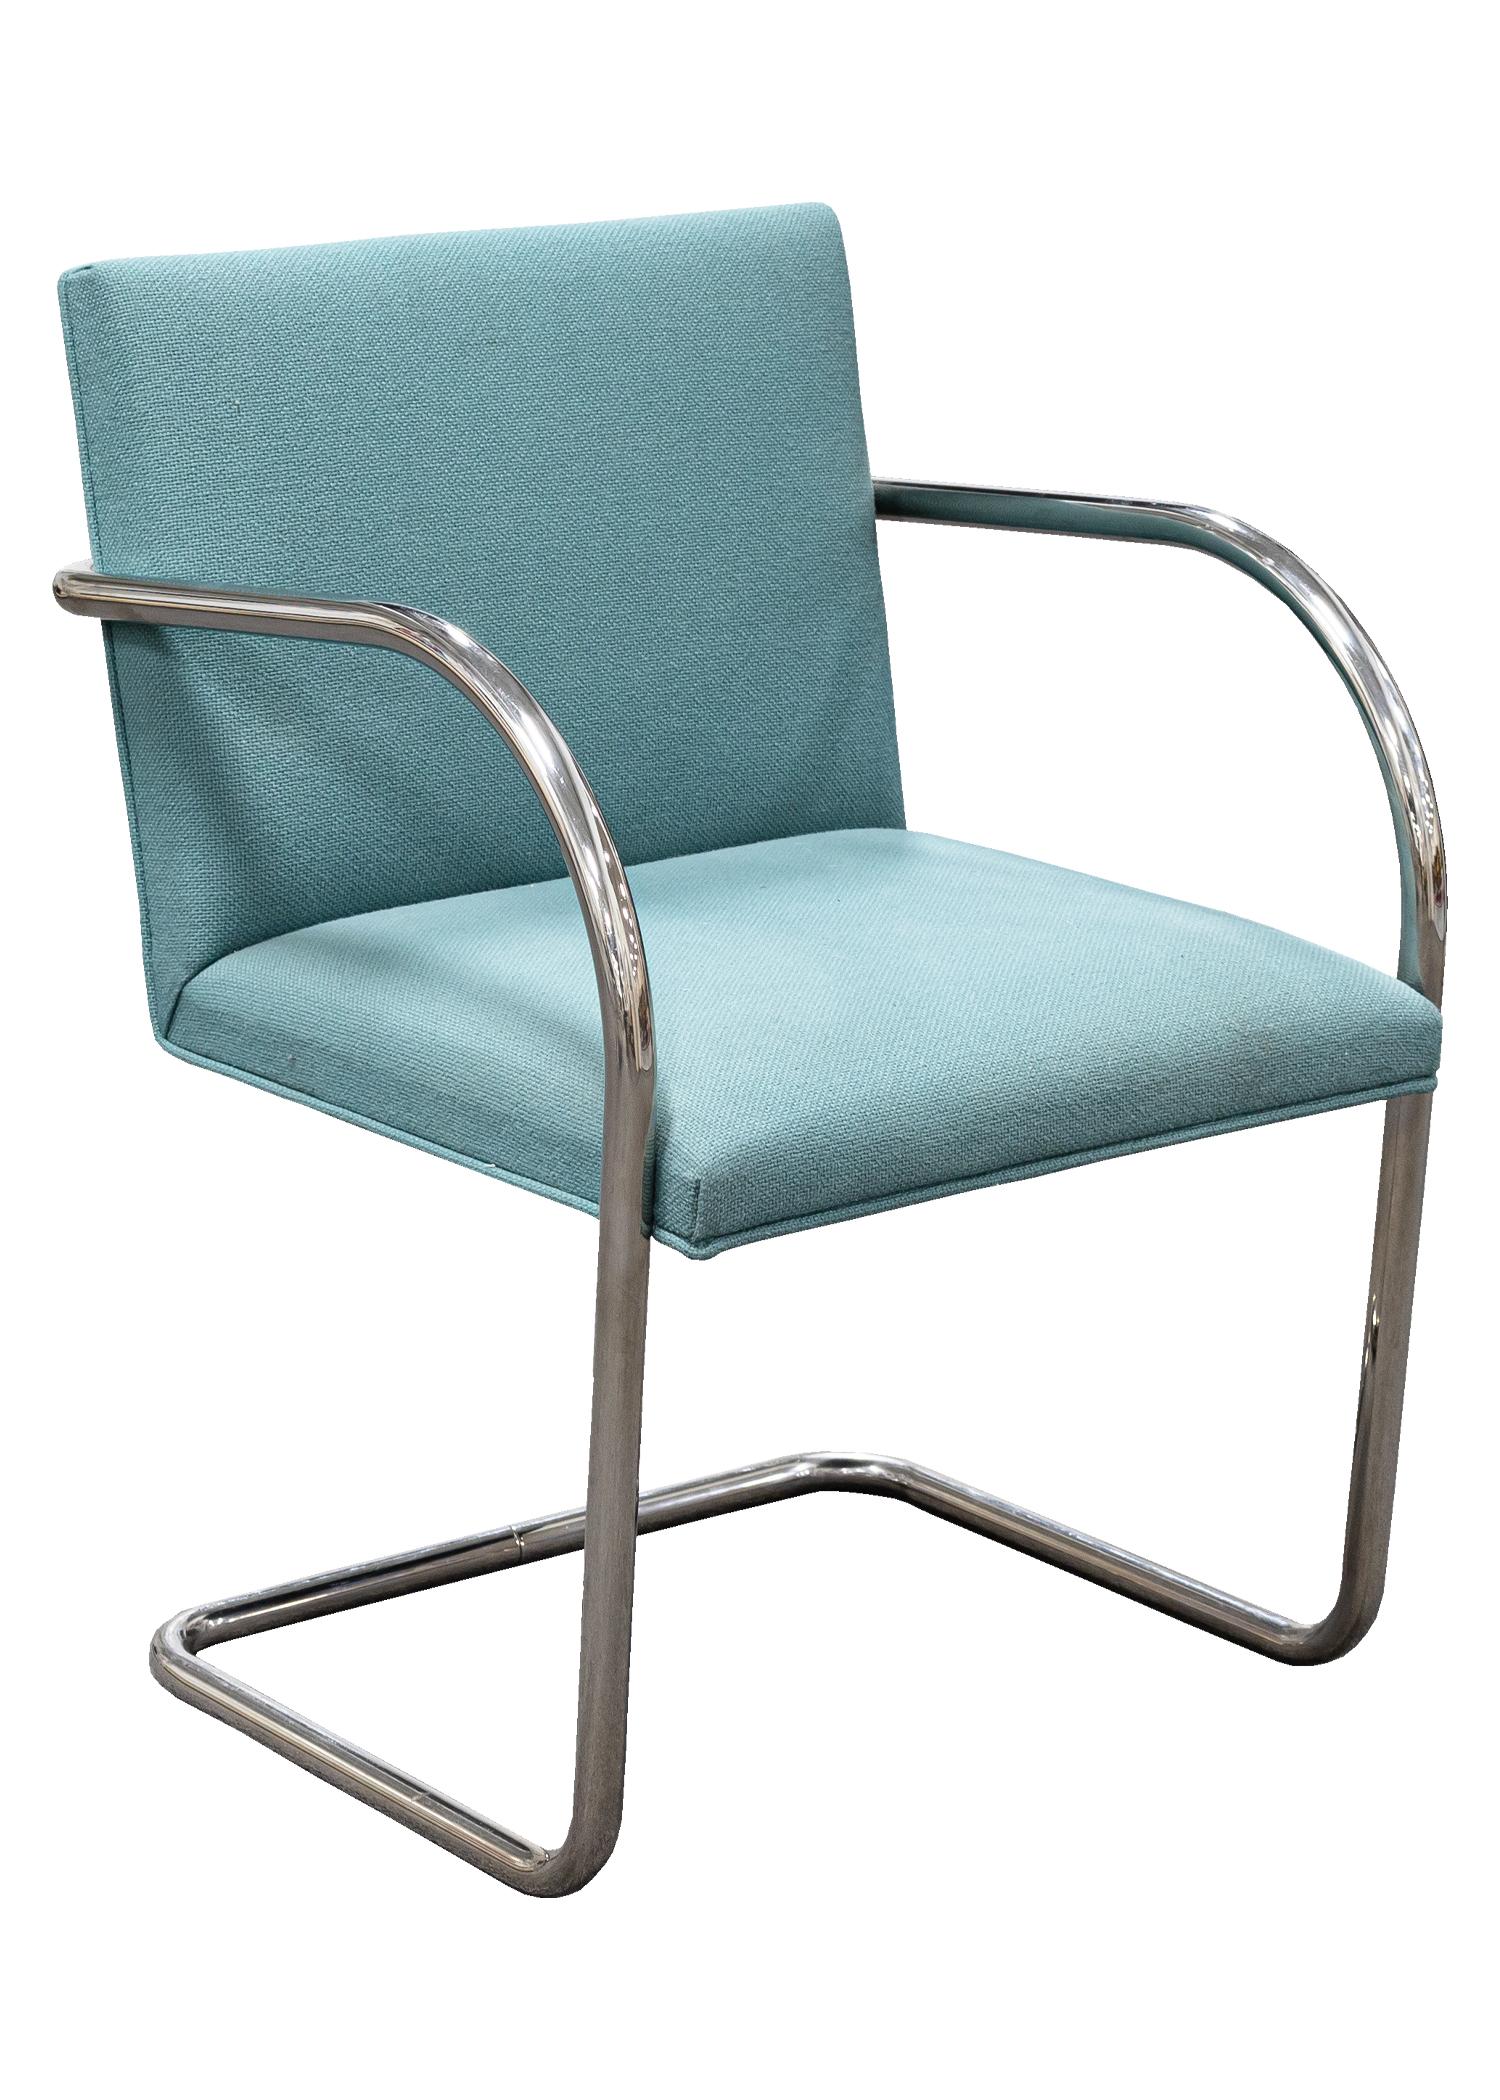 Thonet Set of 4 Tubular Steel Cantilever Modern Chairs Teal Upholstery Seating 5